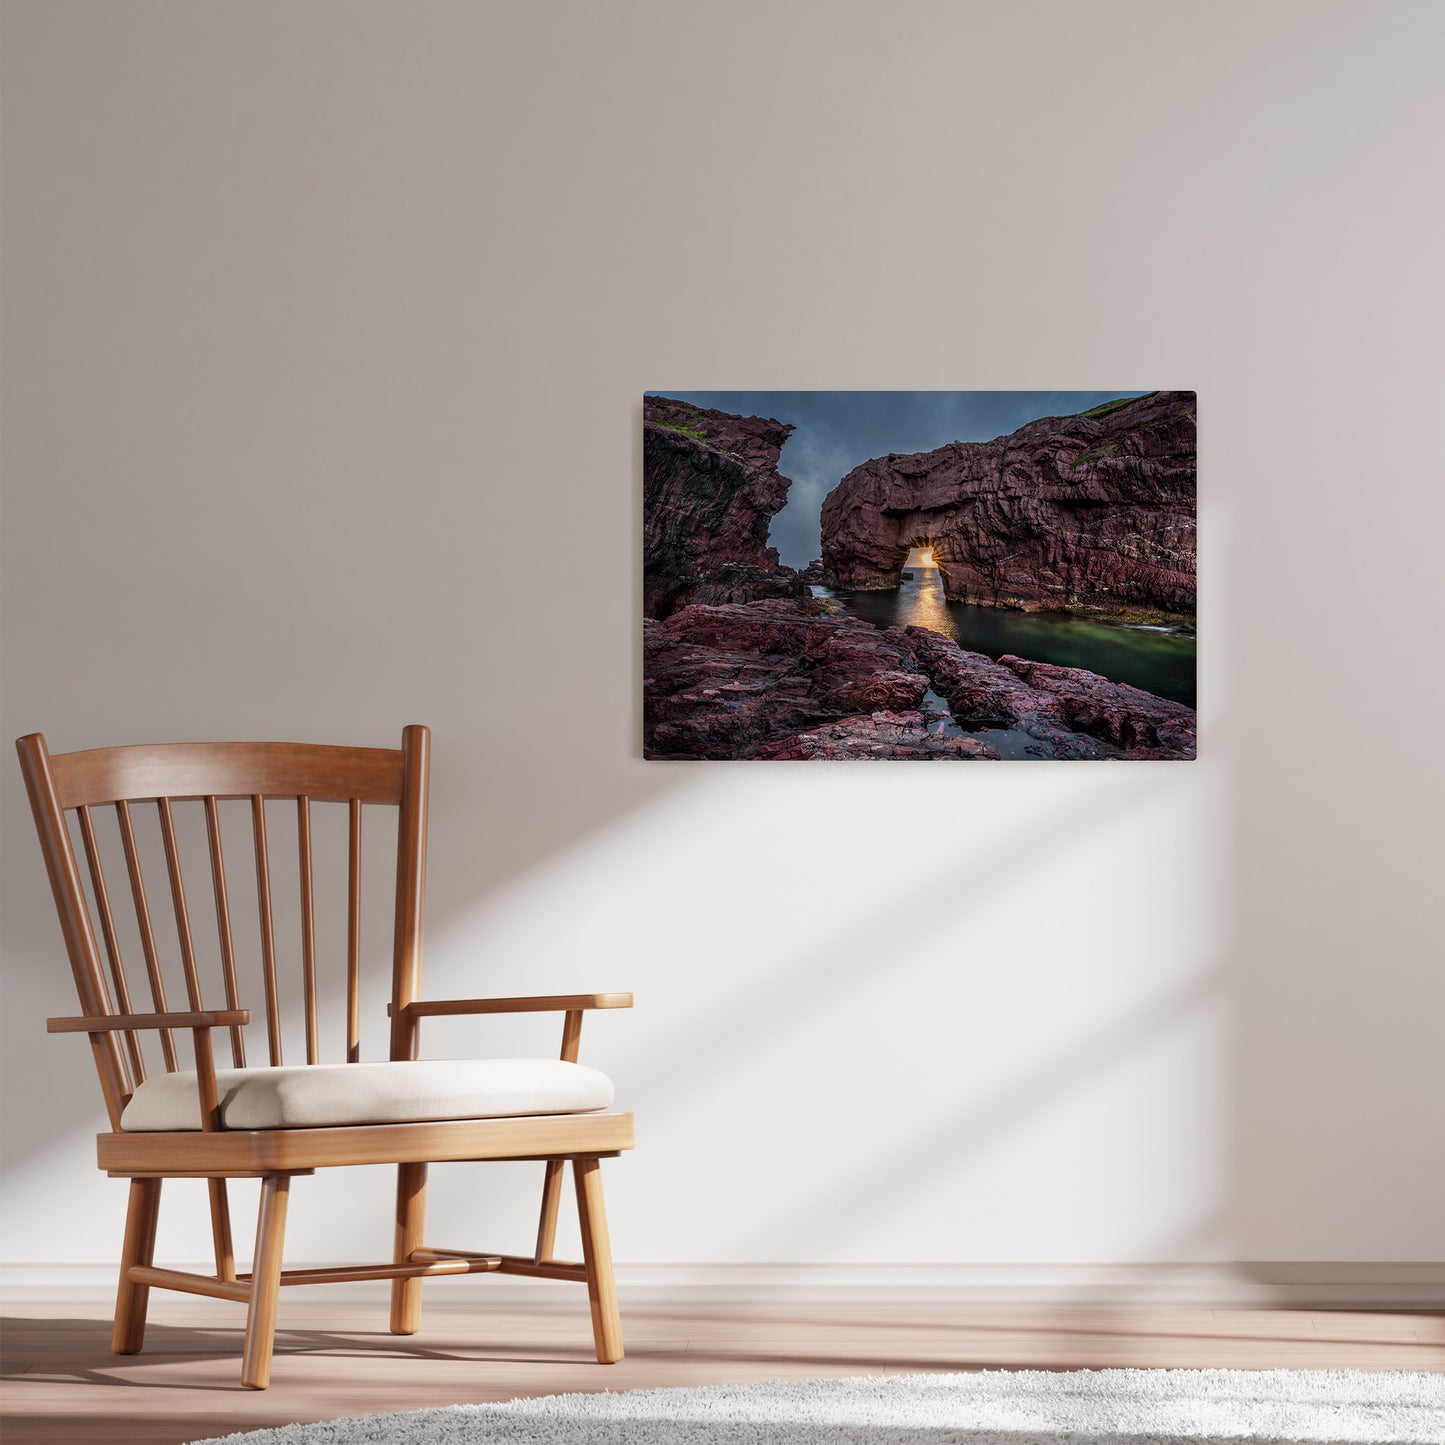 Ray Mackey's Tickle Cove Sunset photography reproduced on HD metal print and displayed on wall